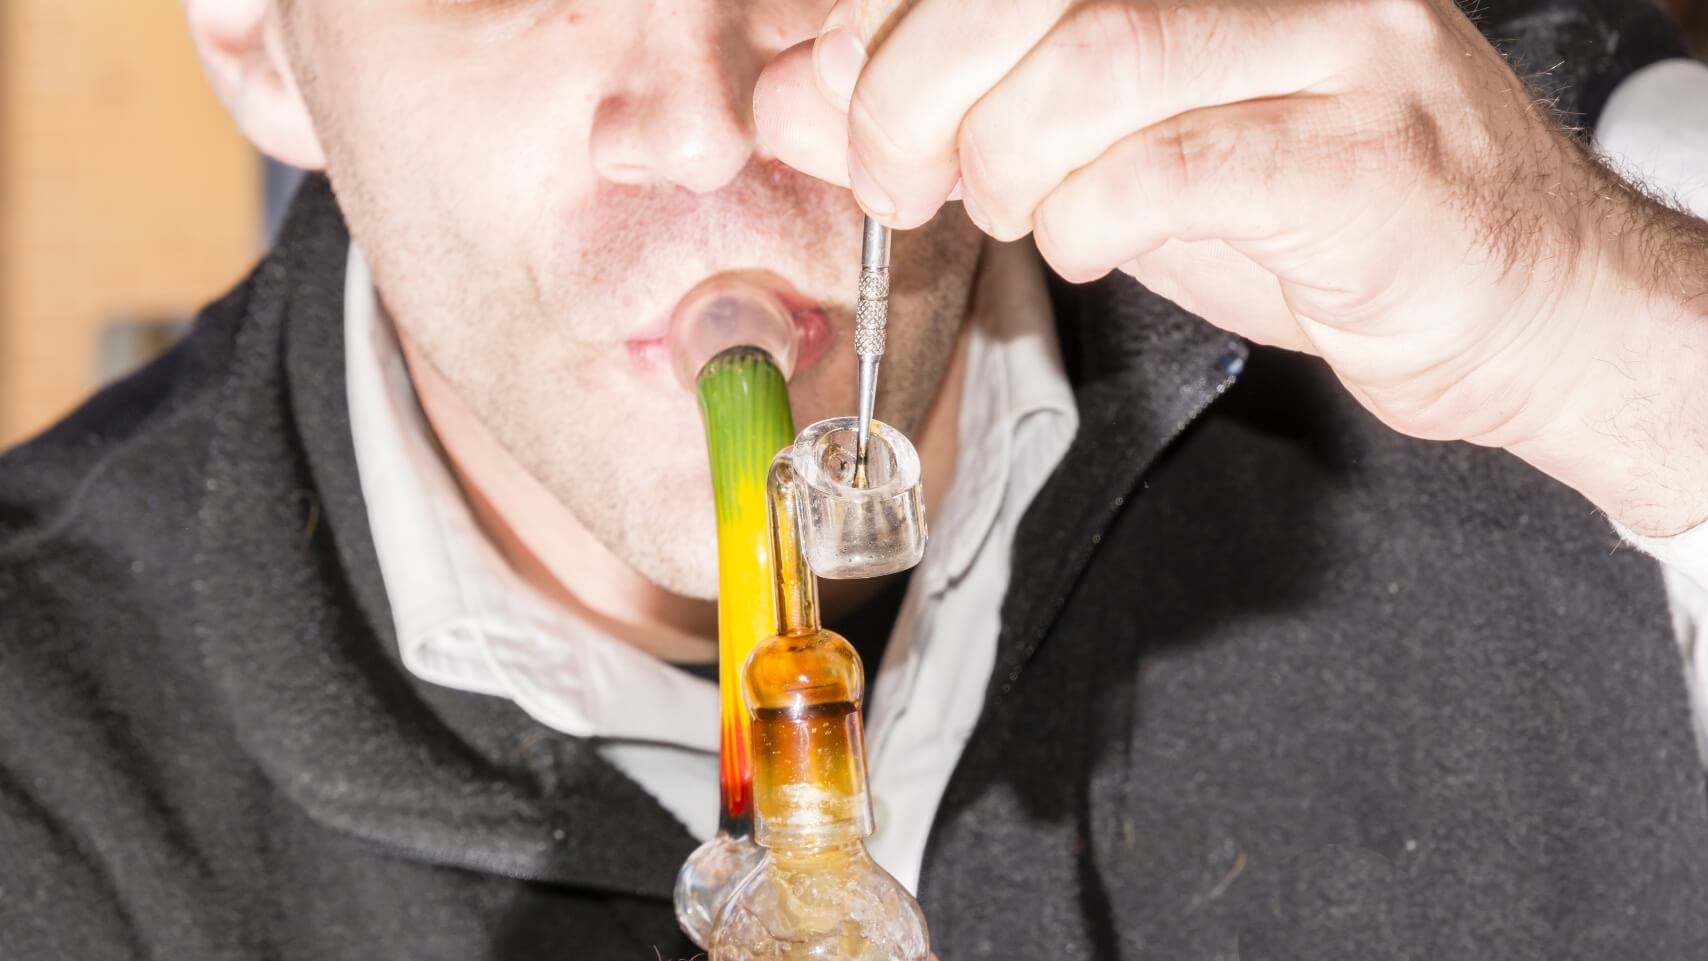 A person inhaling vapor from a dab rig.